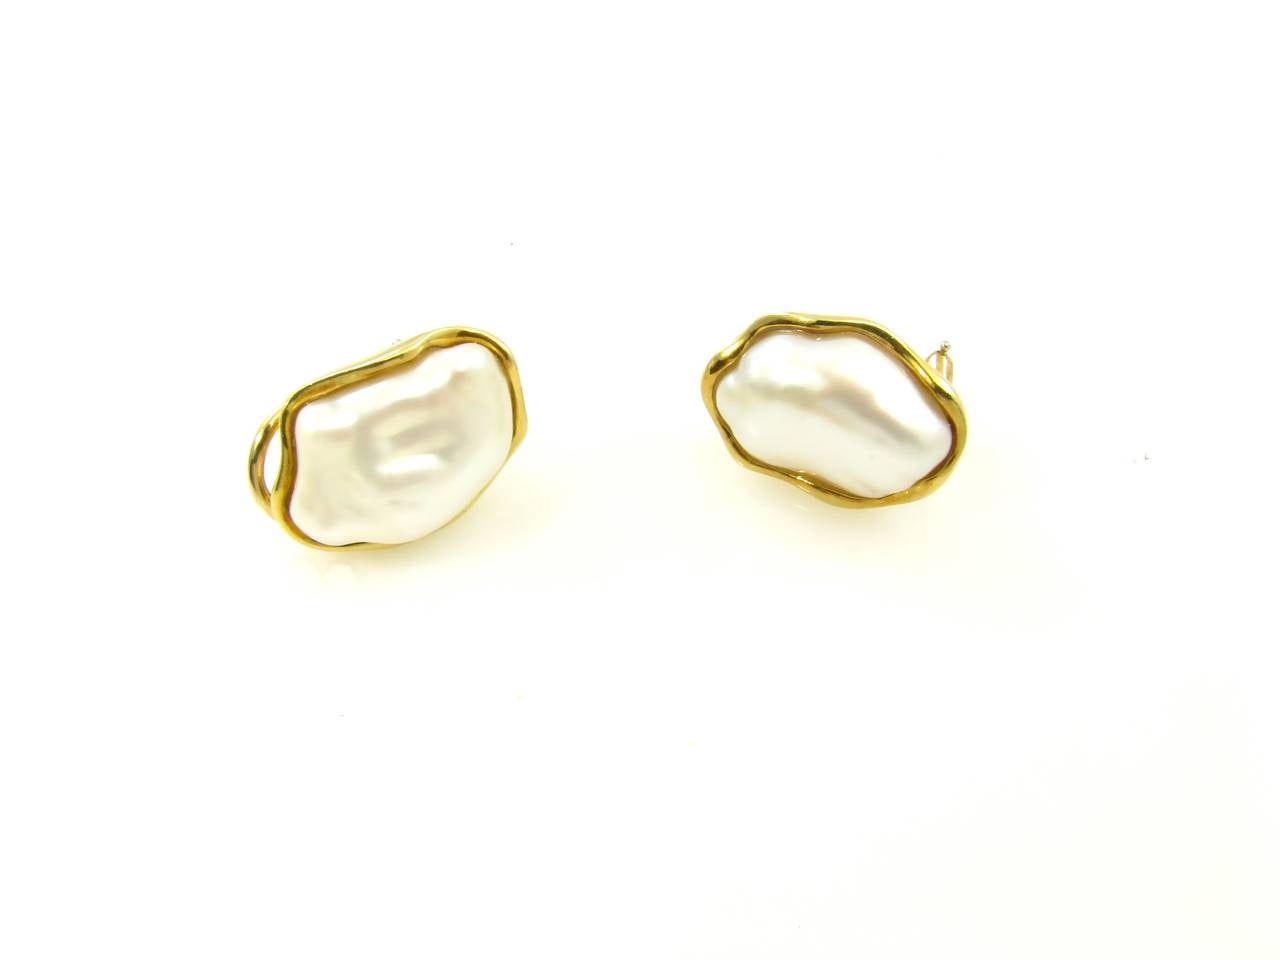 A pair of 18 karat yellow gold and Keshi pearl earrings, Tiffany & Co., Circa 1980s.  The earrings are designed as keshi pearls set within an 18 karat yellow gold conforming frame.  The earrings have a gross weight of approximately 14.3 grams and